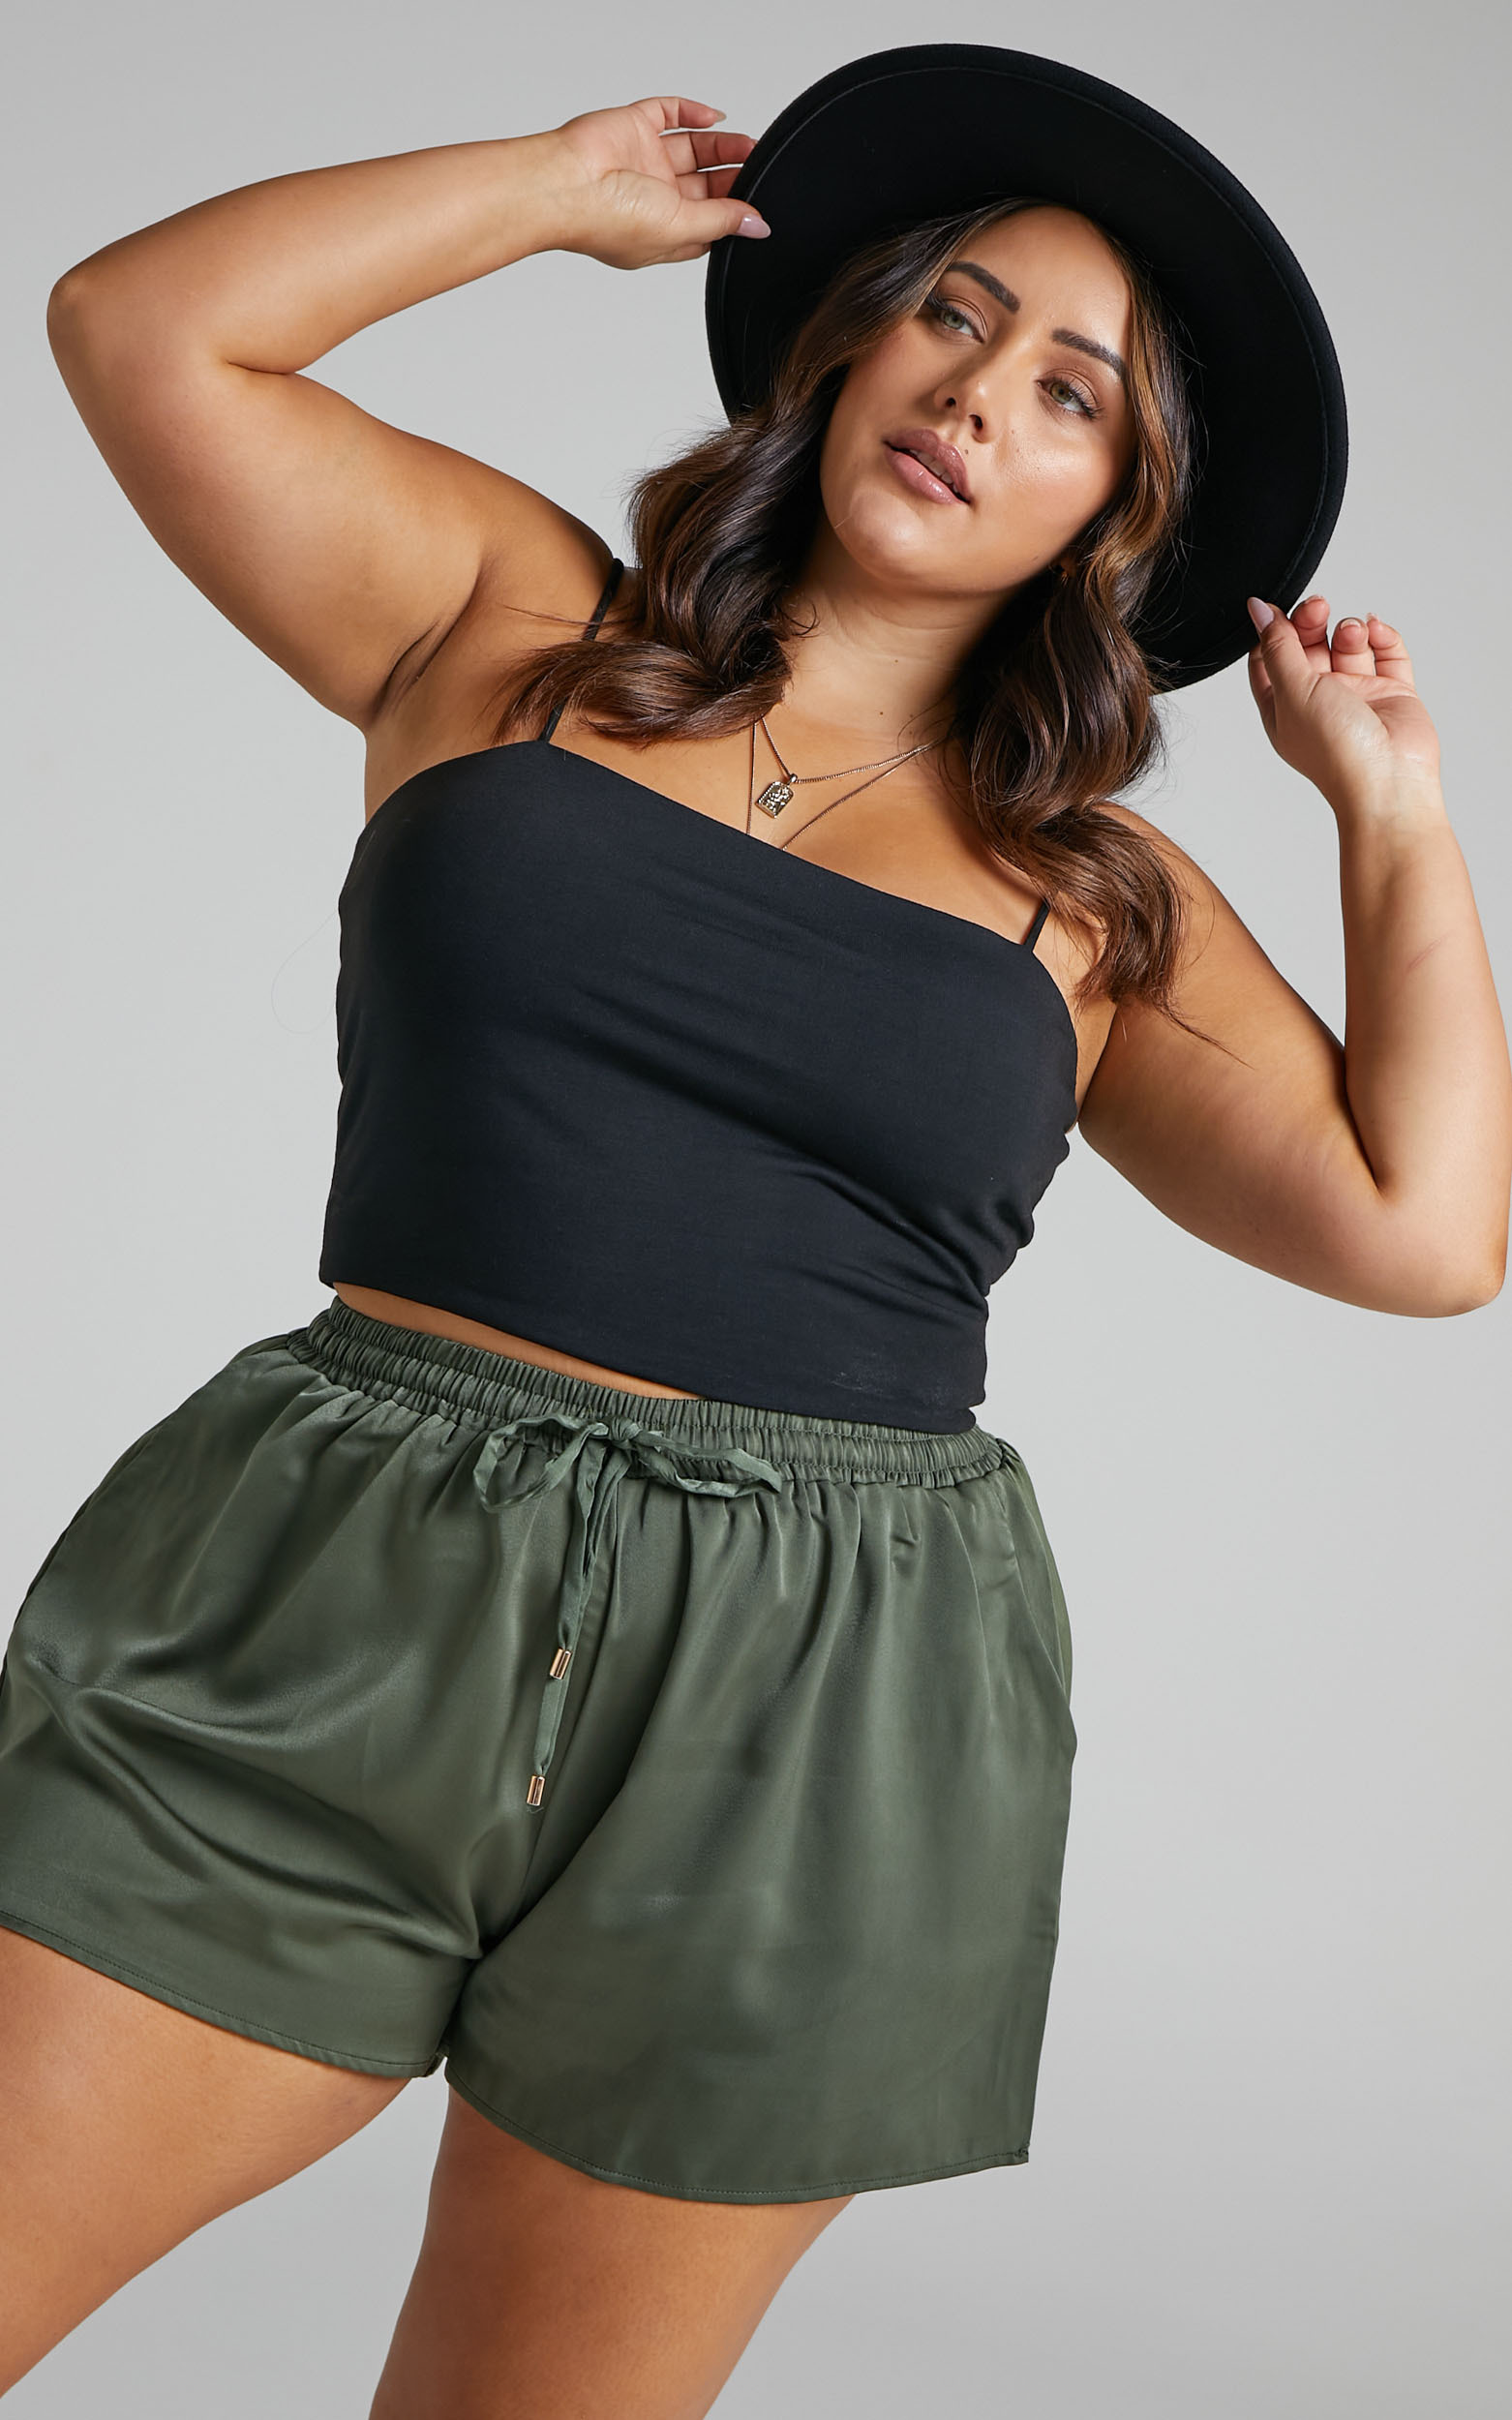 Azurine Satin Shorts with Elasticated Waist in Olive - 04, GRN1, hi-res image number null